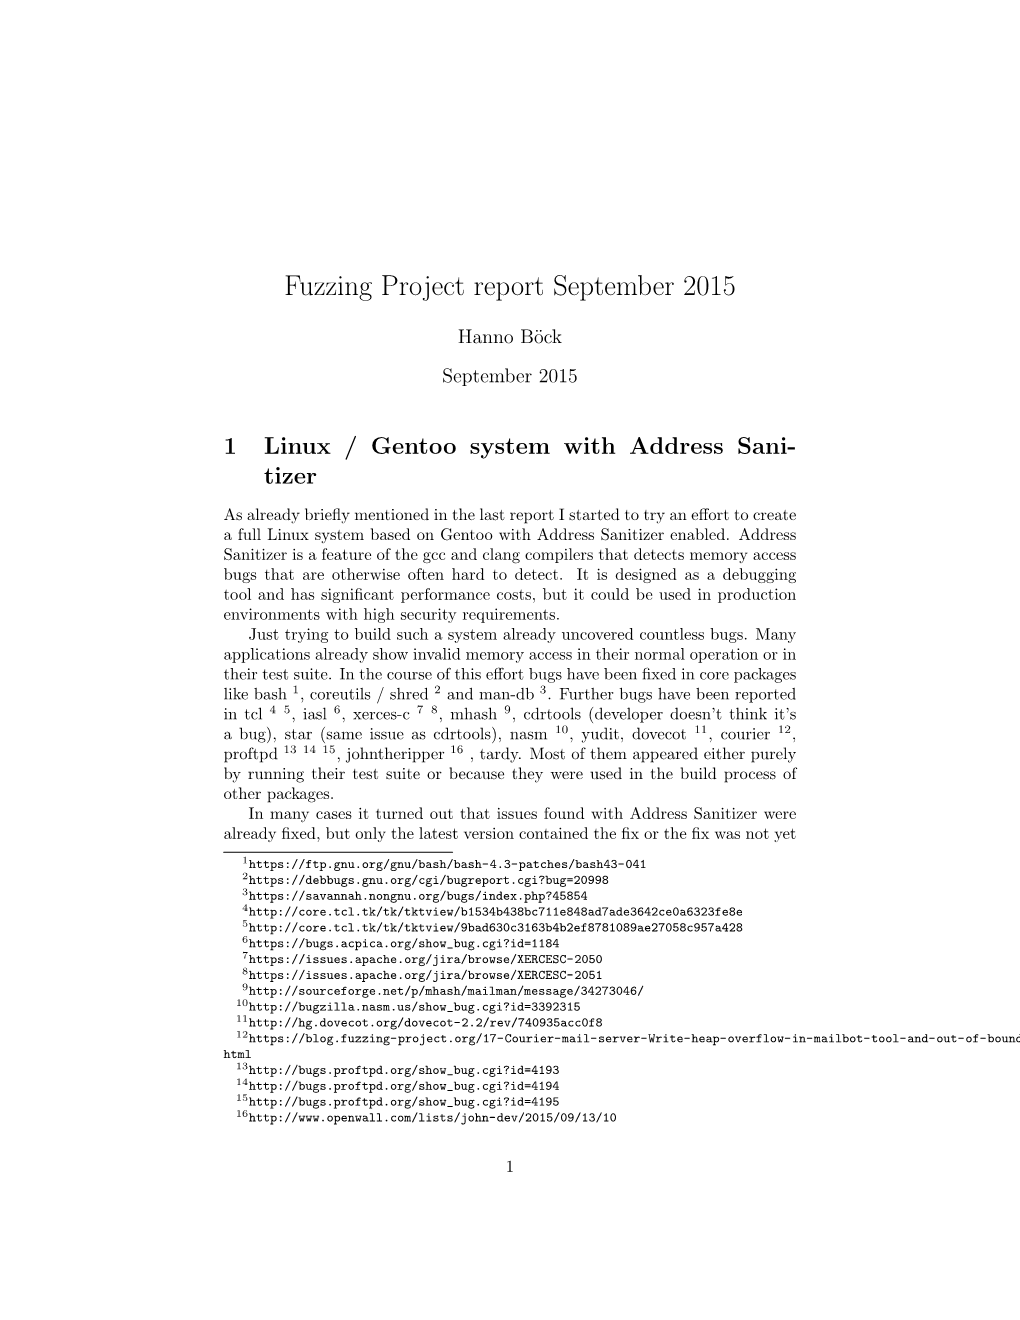 Fuzzing Project Report September 2015